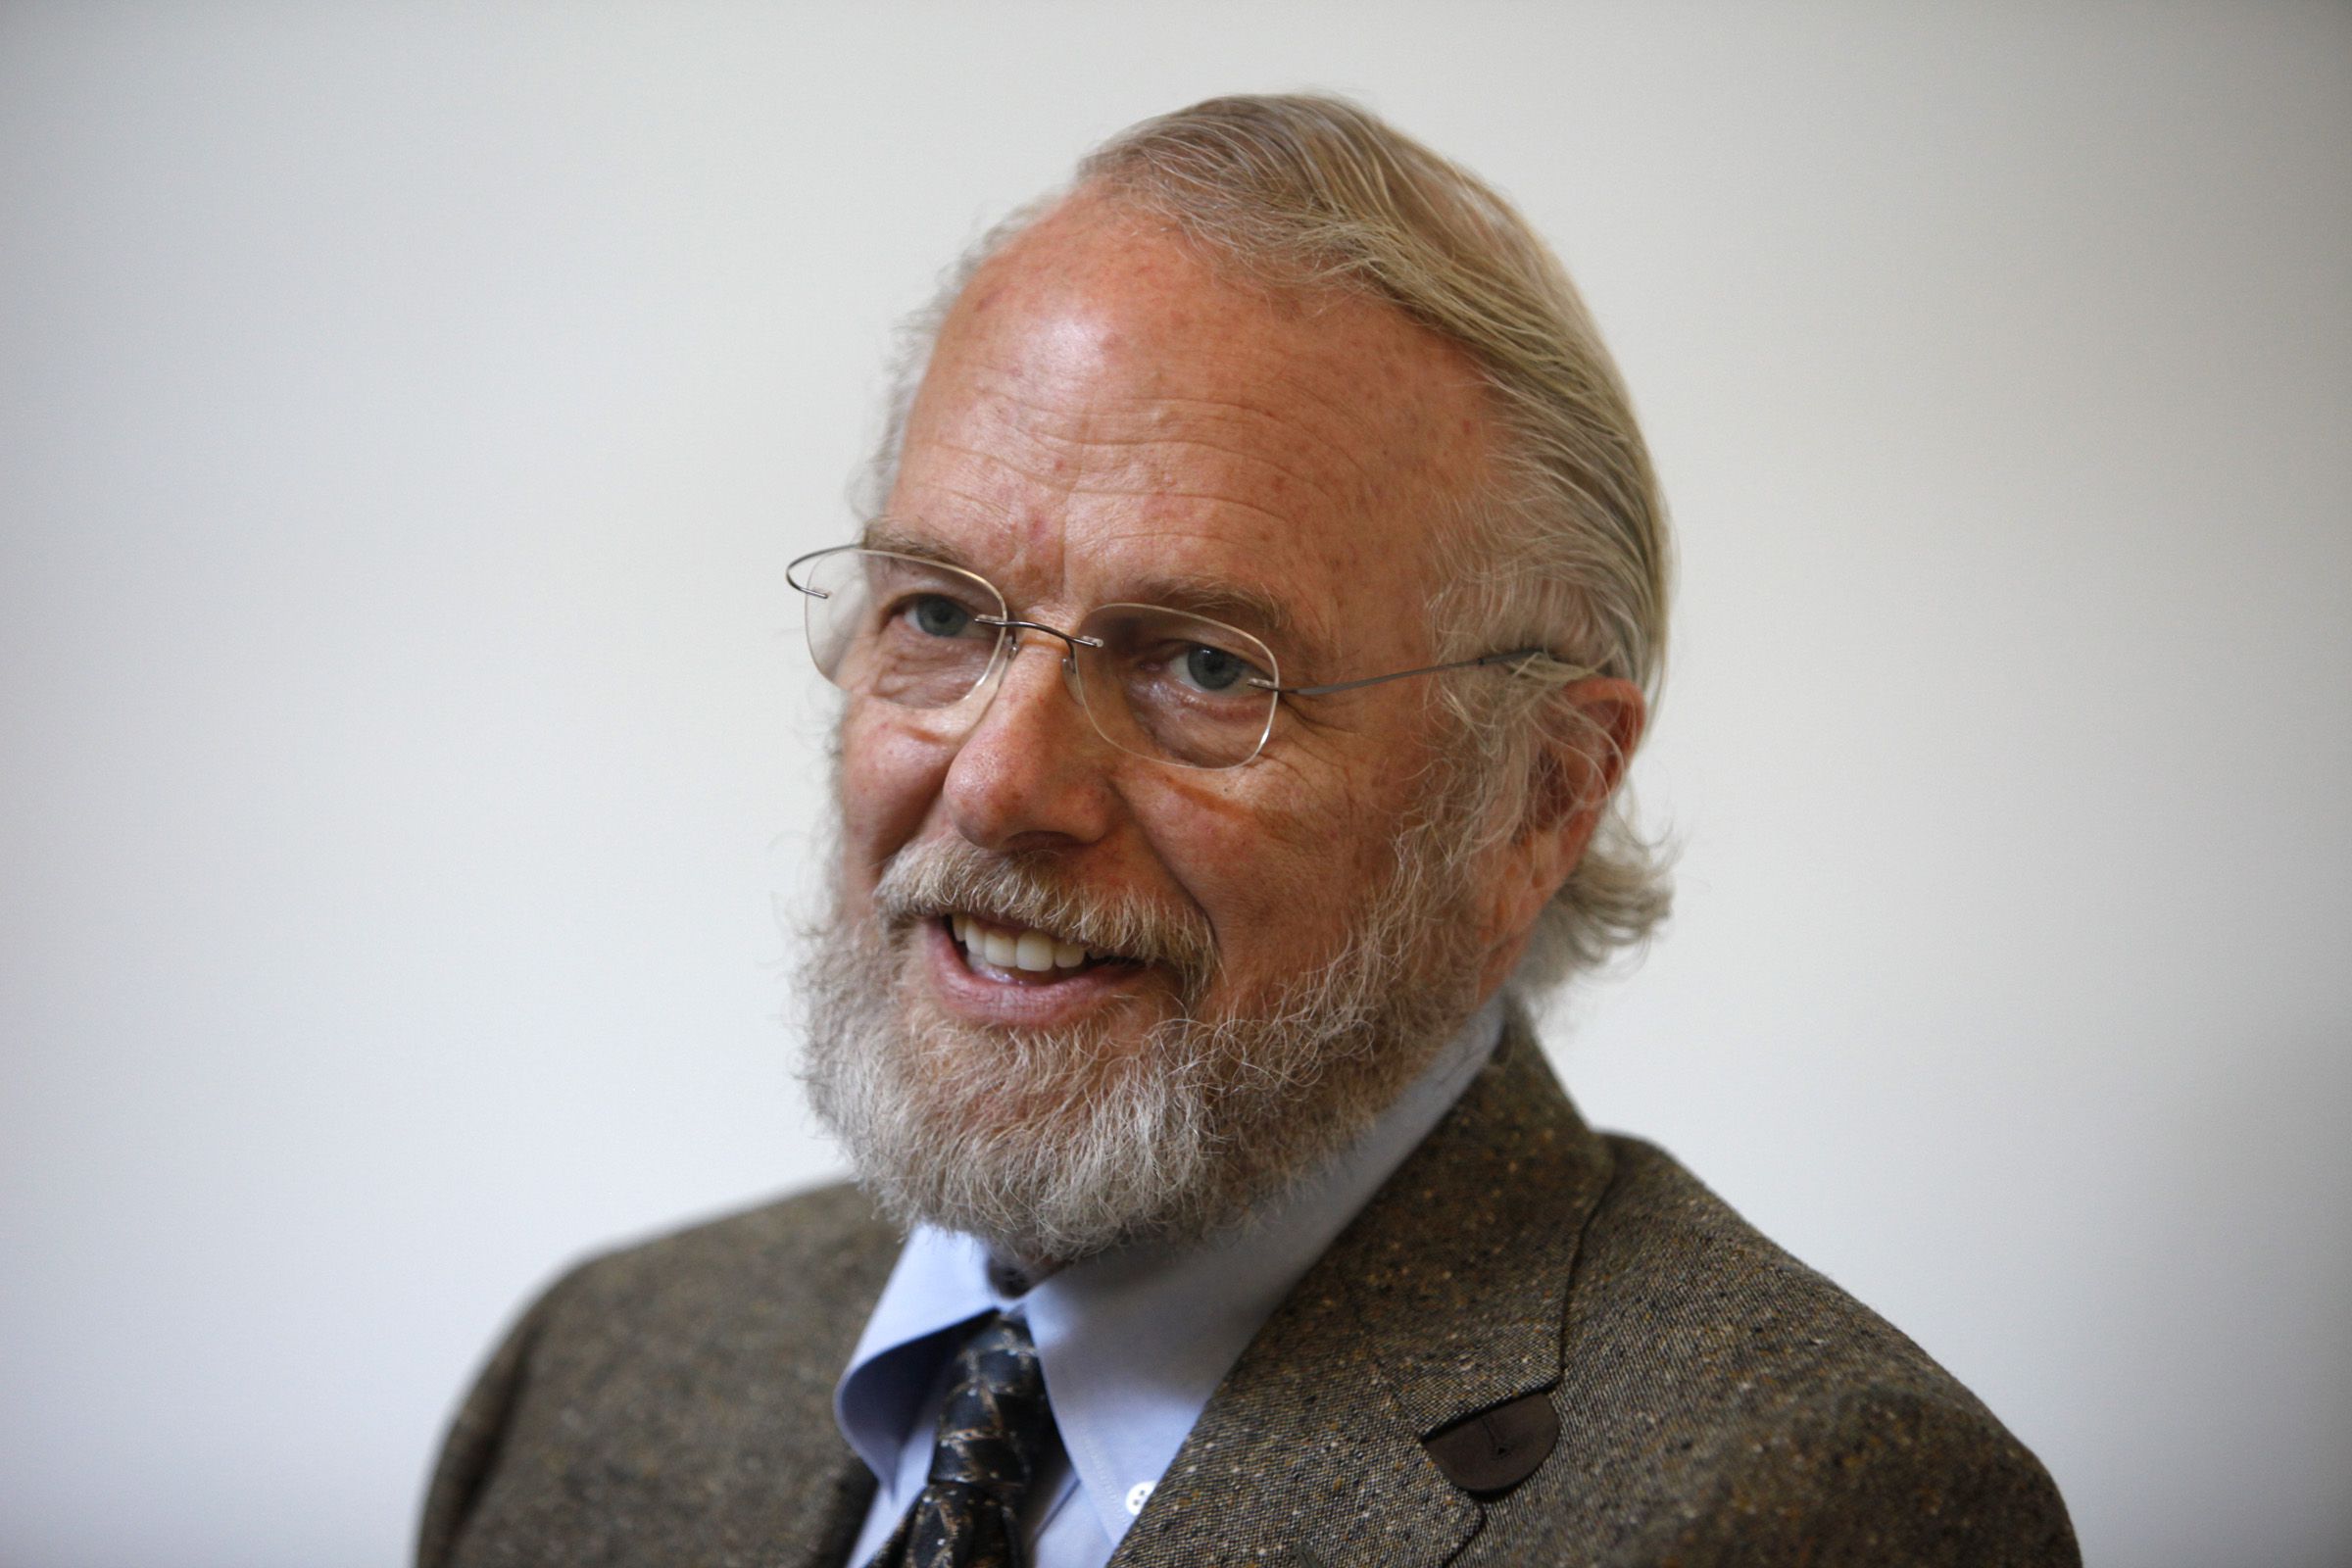 An image of Dr. John Warnock, smiling and looking at someone out of frame. He is wearing glasses, has a short beard, and is wearing a black suit with a blue shirt and black tie.